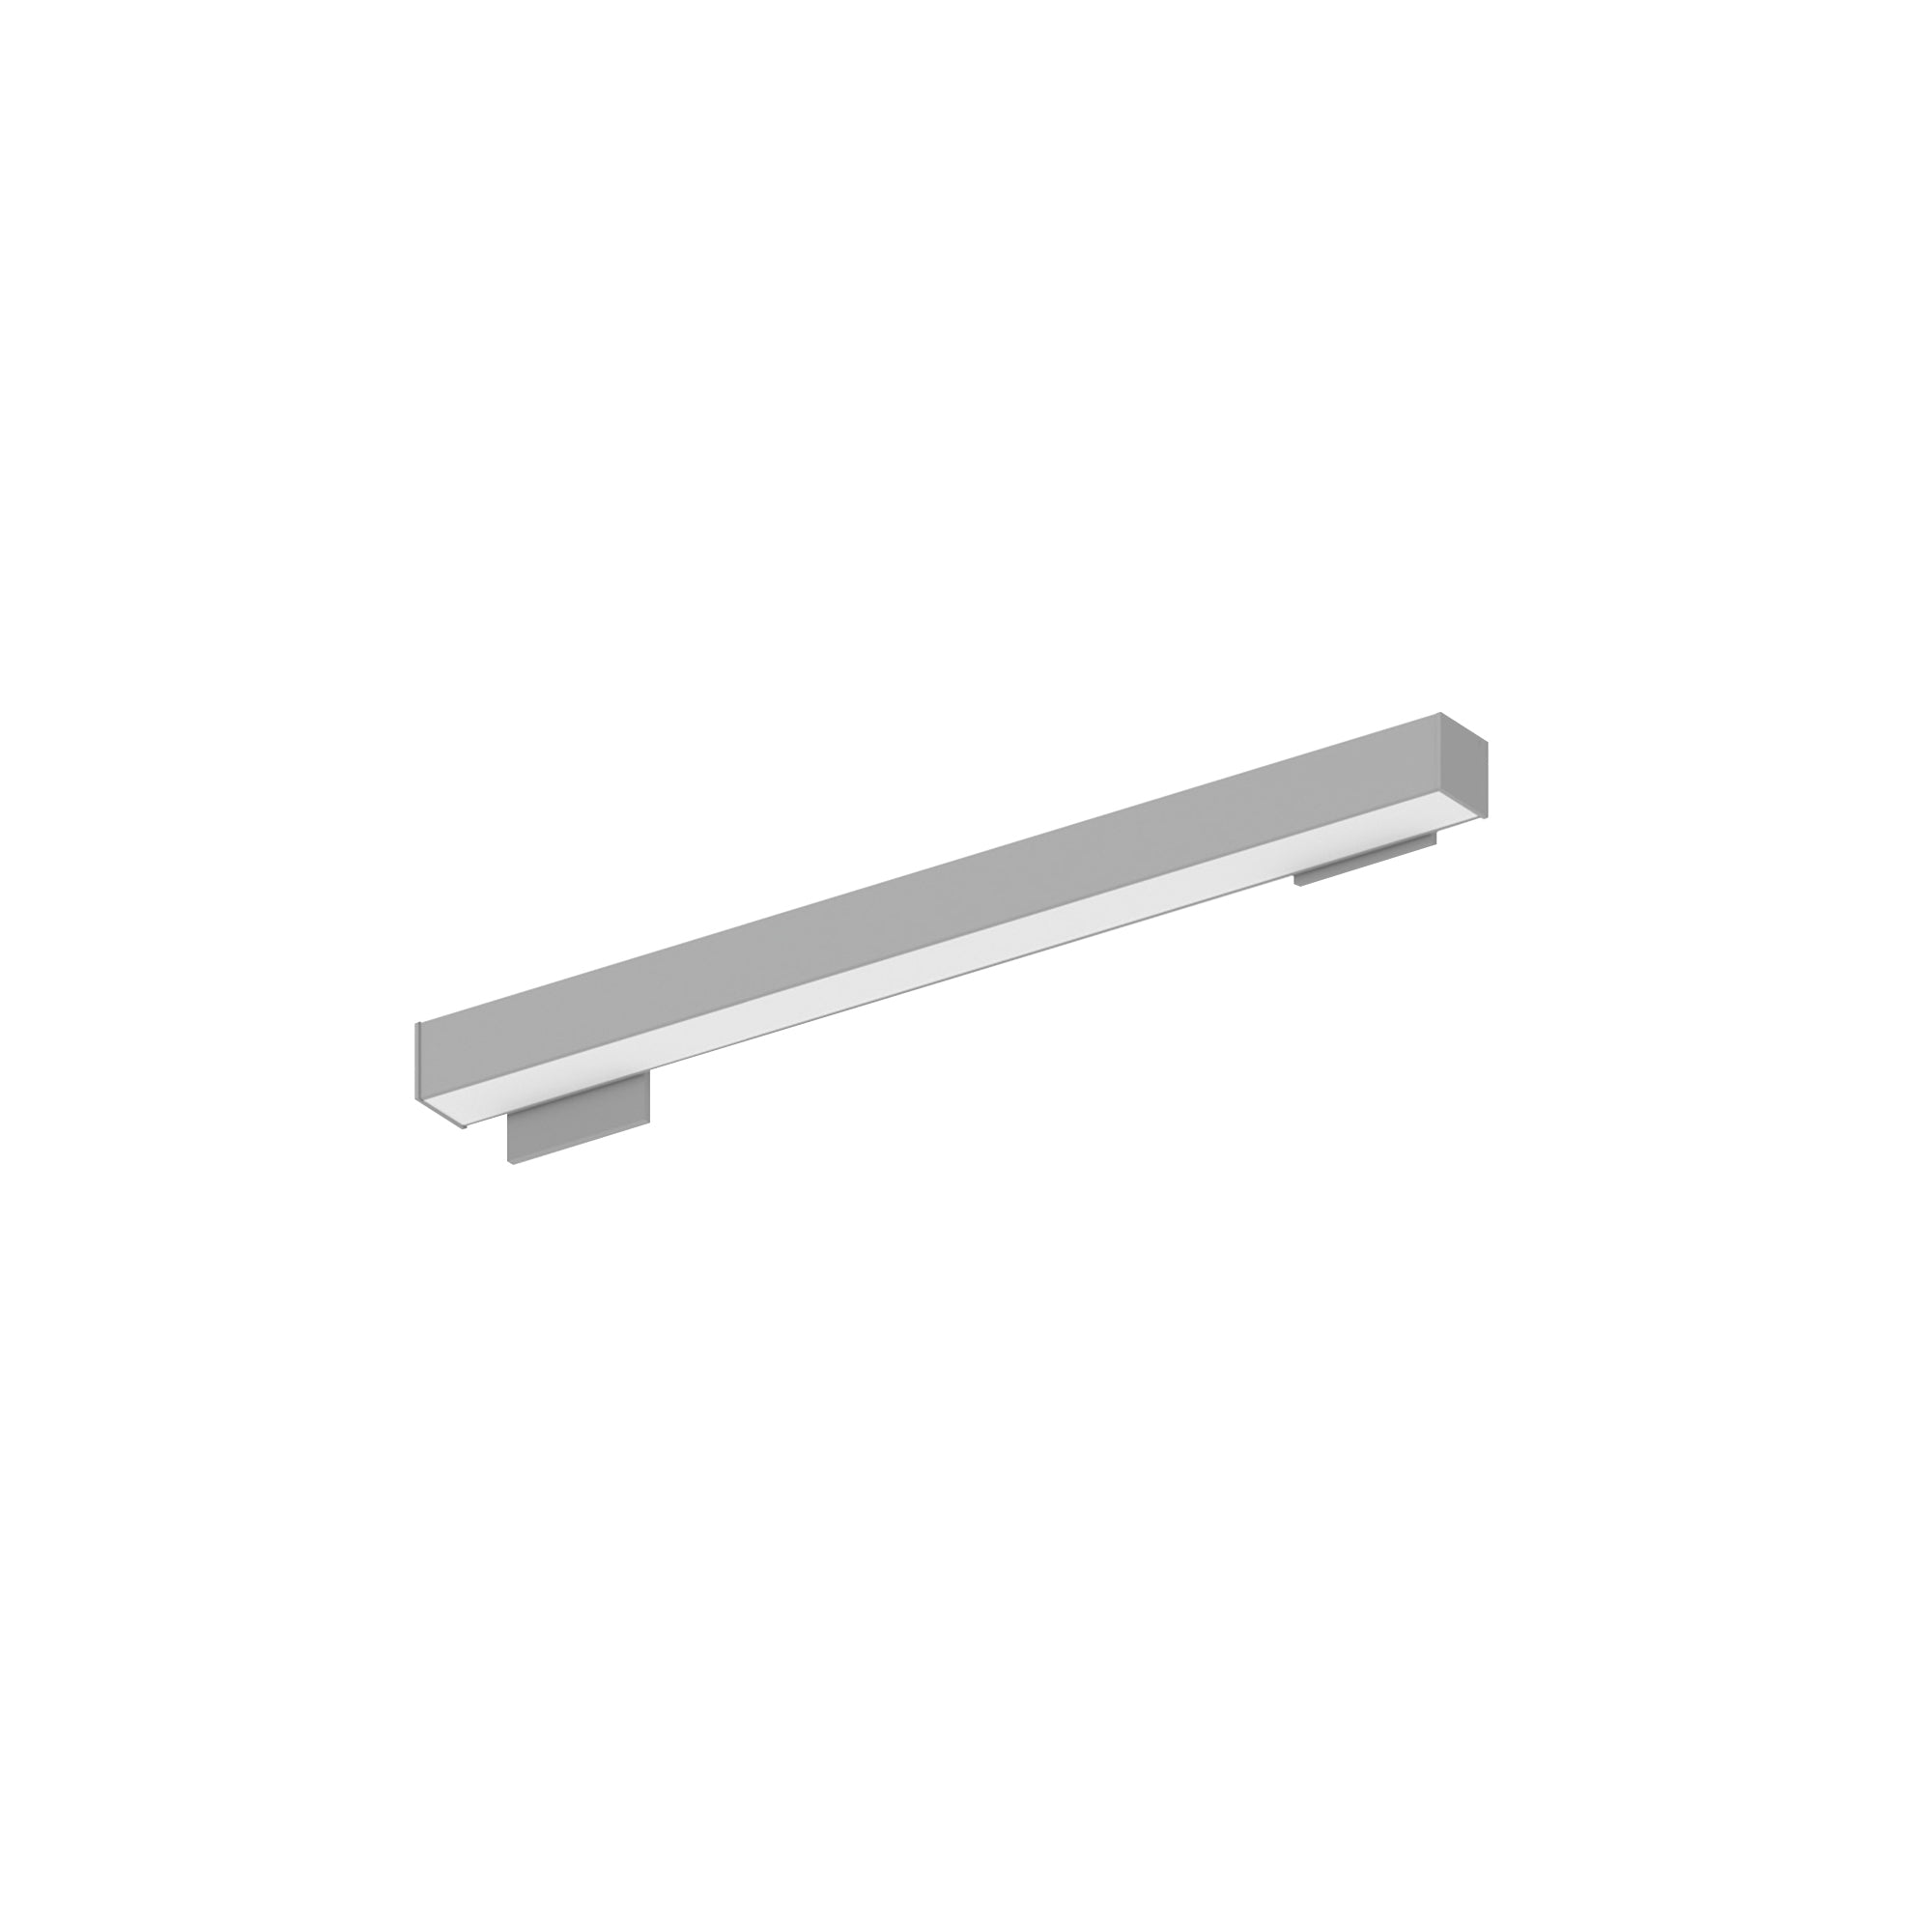 Nora Lighting NWLIN-21035A/L4P-R2 - Linear - 2' L-Line LED Wall Mount Linear, 2100lm / 3500K, 4 Inchx4 Inch Left Plate & 2 Inchx4 Inch Right Plate, Left Power Feed, Aluminum Finish